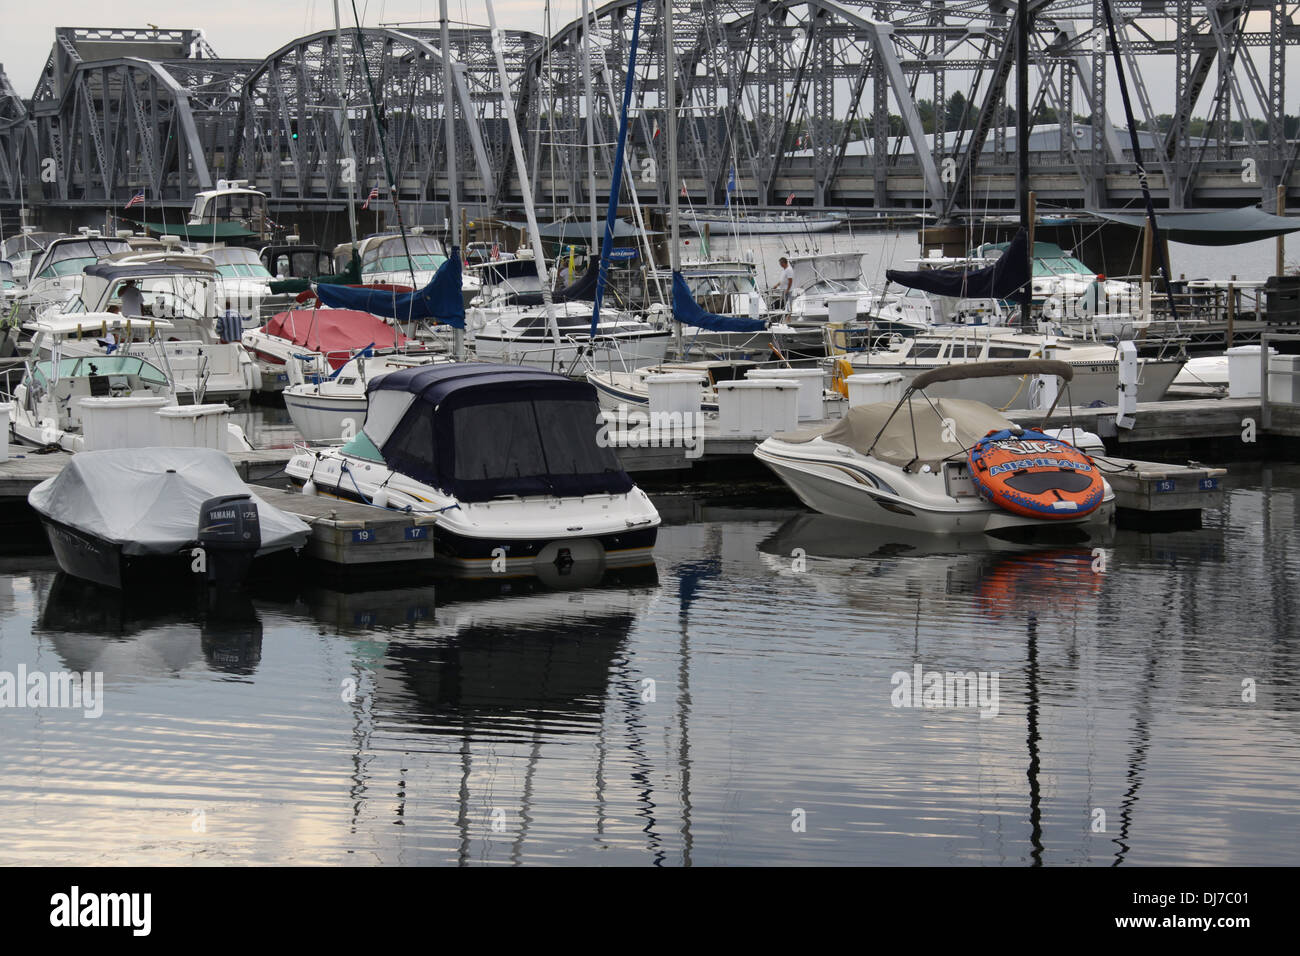 Boats in a marina in Sturgeon Bay, WI with the city's steel bridge in the background Stock Photo